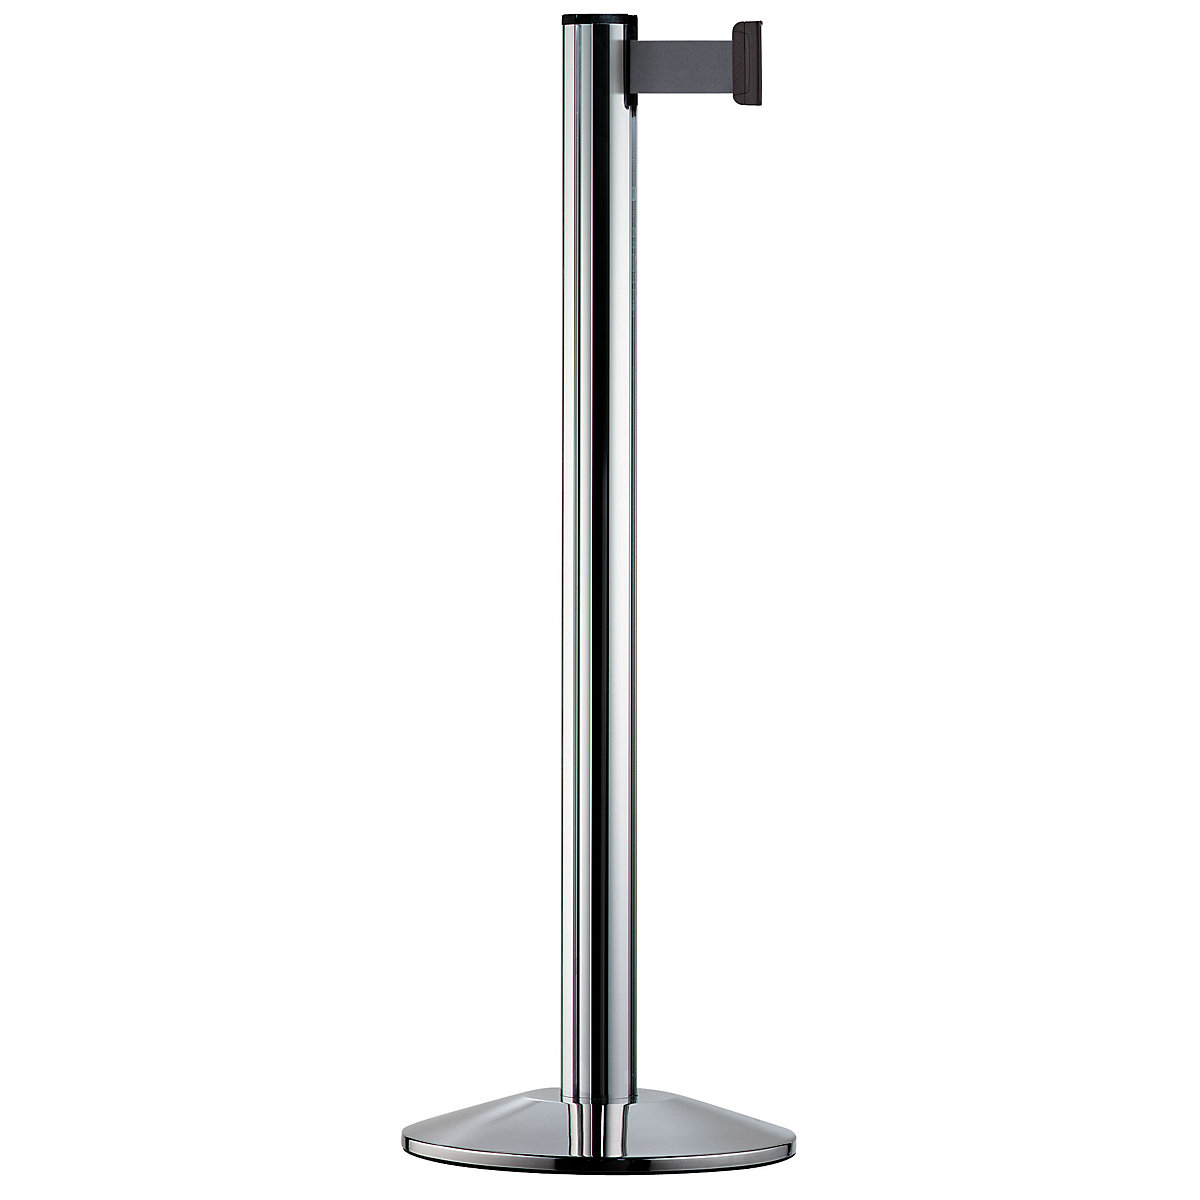 Belt post made of aluminium, post polished chrome, extends 2300 mm, belt colour silver grey-8